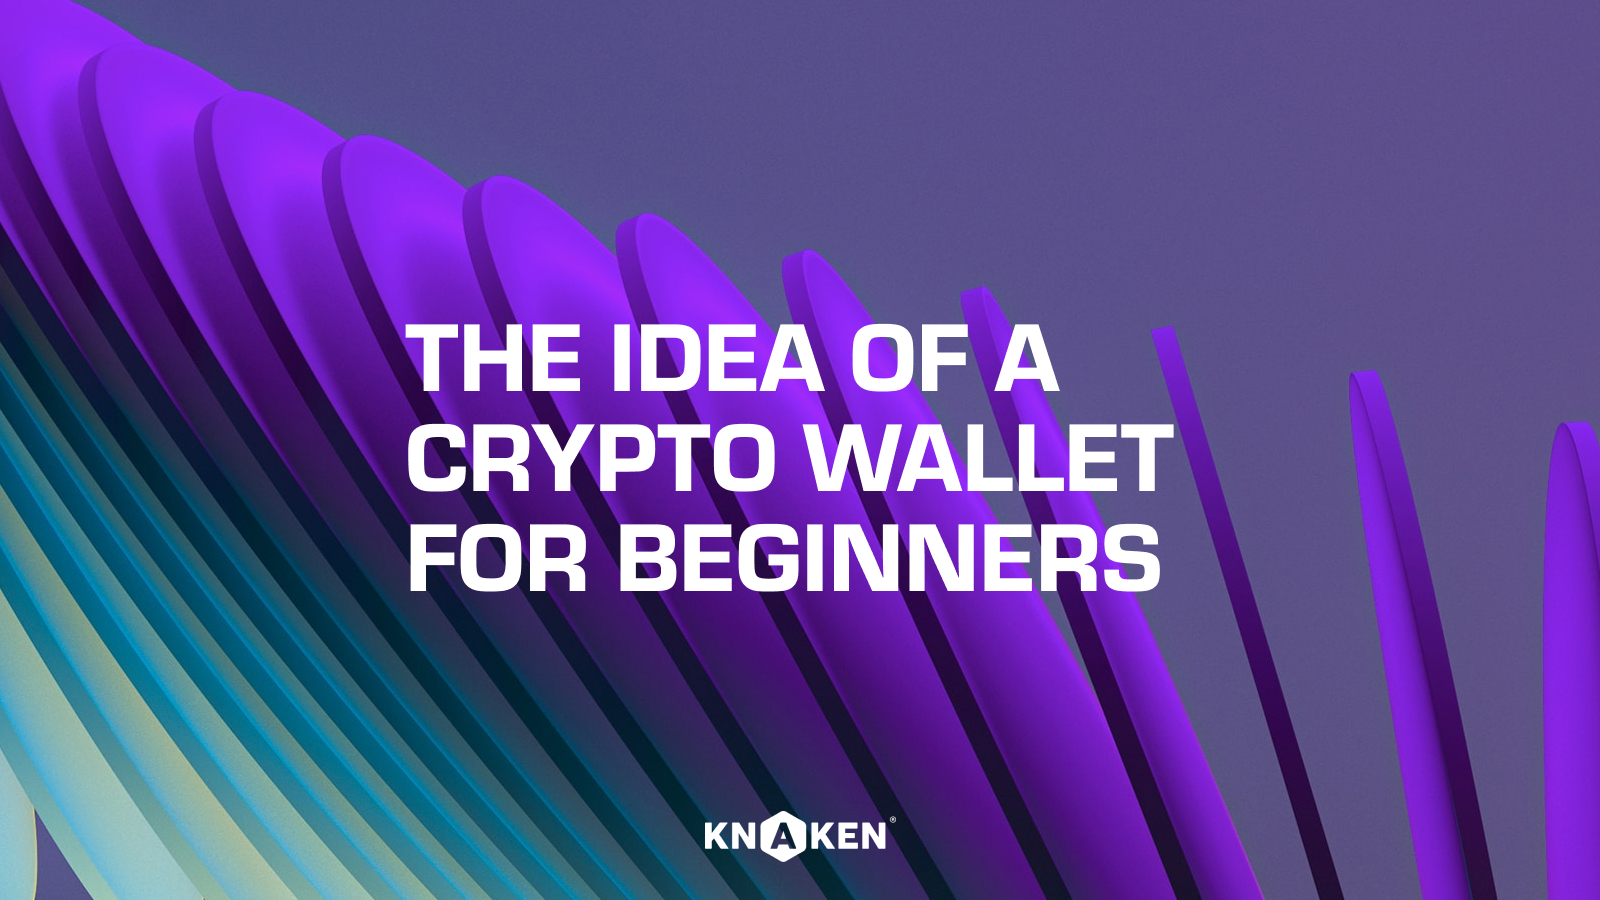 The idea of a Crypto Wallet for beginners: Discover the world of digital currencies